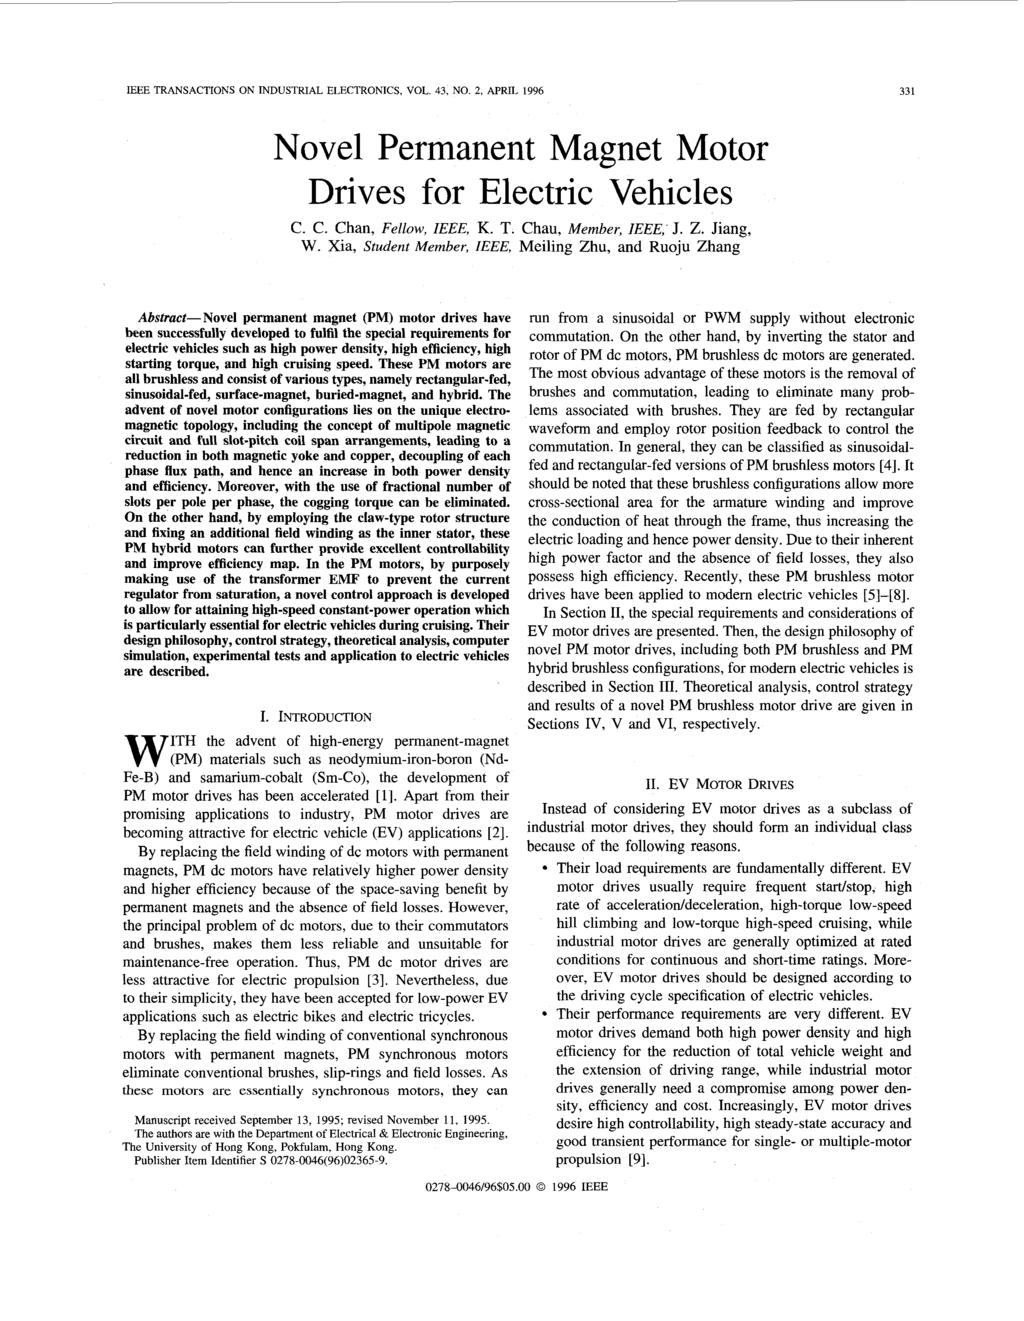 IEEE TRANSACTIONS ON INDUSTRIAL ELECTRONICS, VOL. 43, NO. 2, APRIL 1996 331 Novel Permanent Magnet Motor Drives for Electric Vehicles C. C. Chan, Fellow, IEEE, K. T. Chau, Member, IEEE,' J. Z.